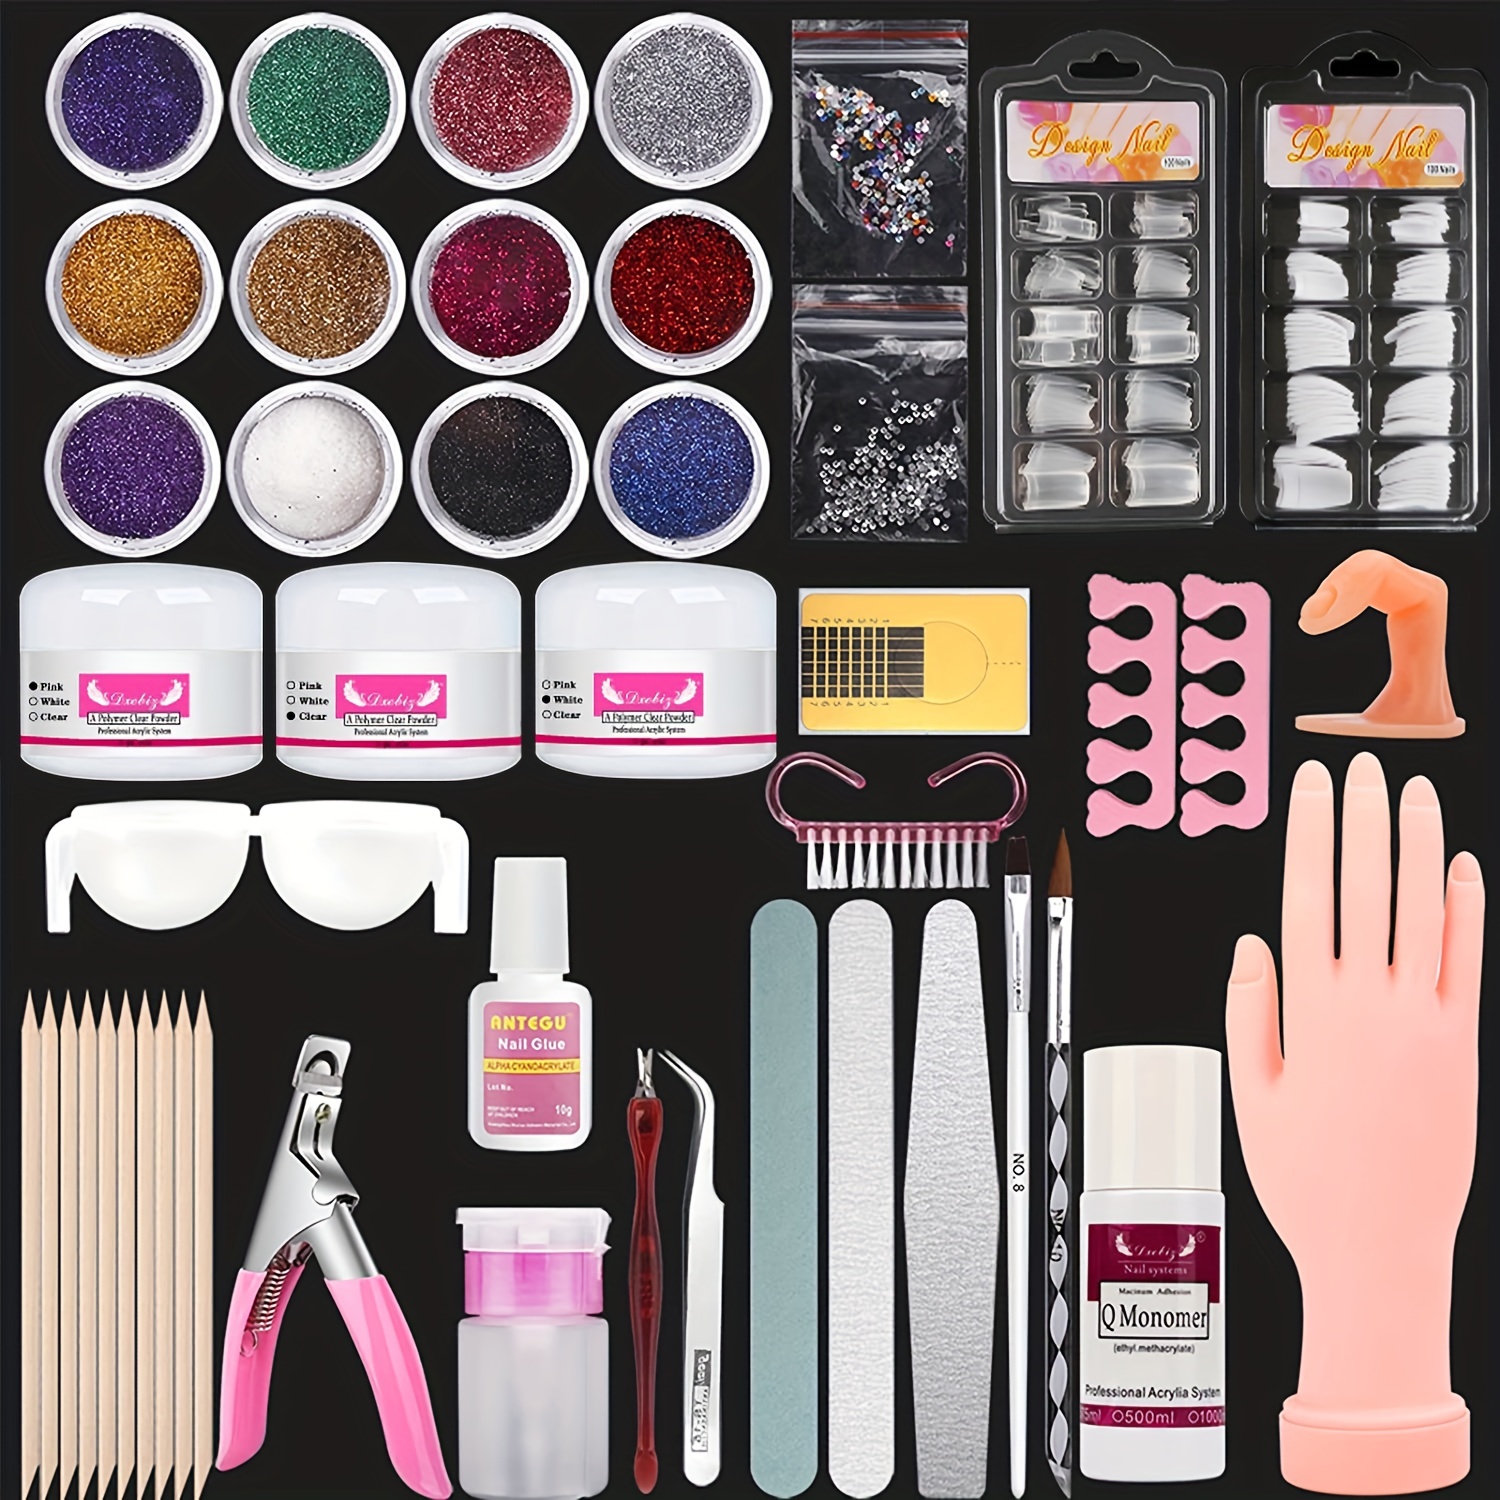 Professional Acrylic Nail Kit Set With Everything 12 Glitter Acrylic Powder Kit Practice Hand With Fingers Nail Art Tips Nail Art Decoration Nail Monomer Liquid DIY Nail Art Tool Nail Supplies Acrylic System For Beginners details 1